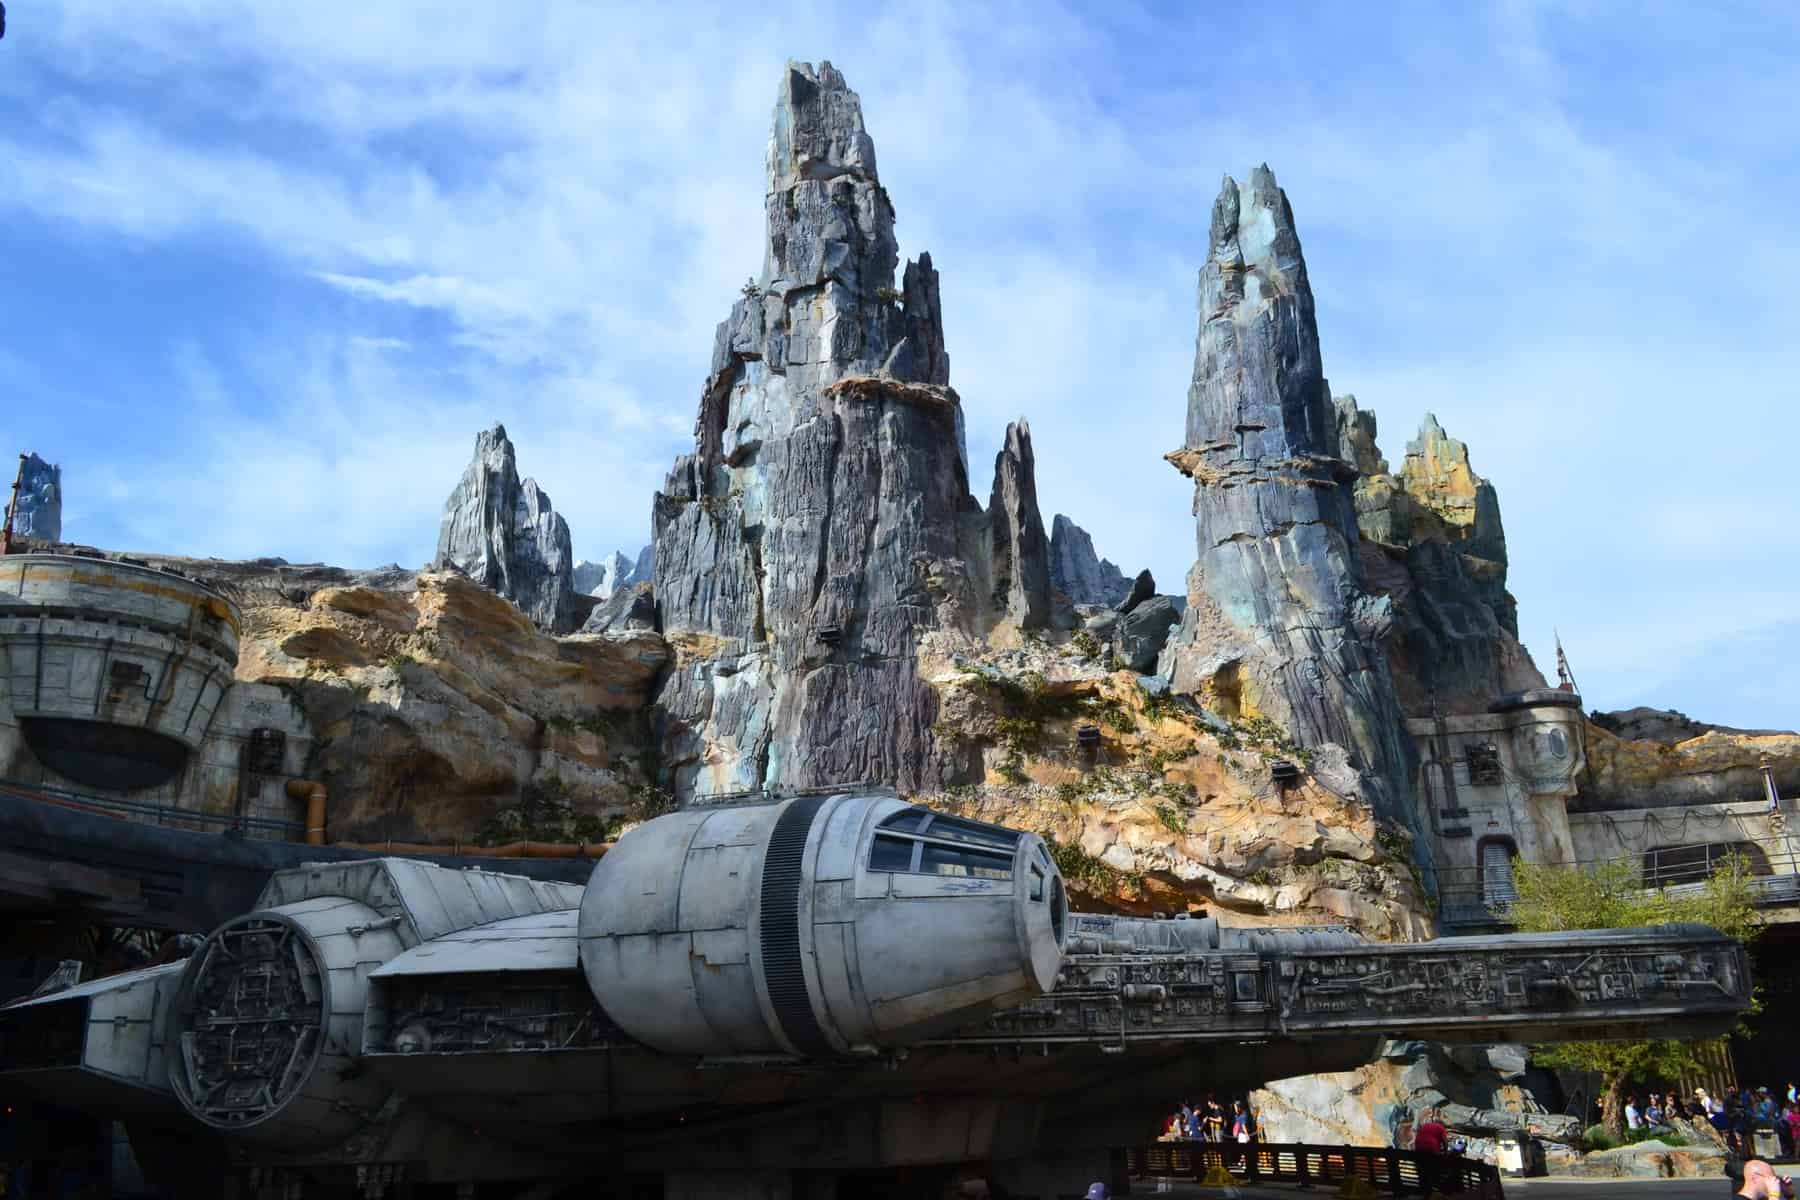 Star Wars: Galaxy’s Edge at Hollywood Studios (Rise of the Resistance, Savi’s Workshop)